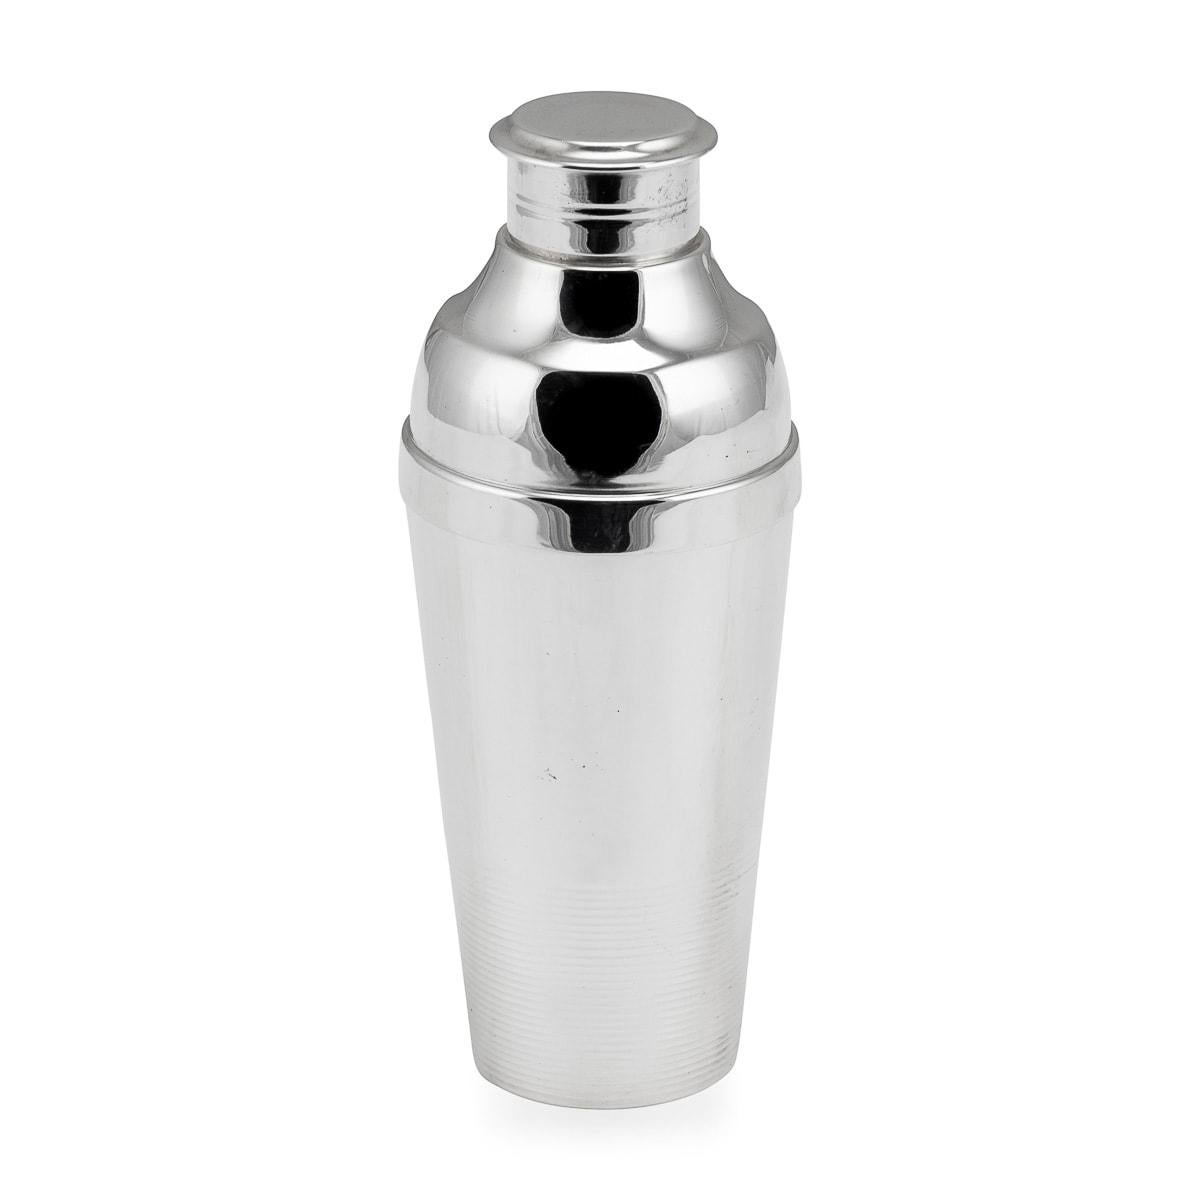 A quality cocktail shaker in silver plate by Christofle, made in France around middle part of the 20th century. It is part of the Gallia collection which was an innovative alloy which allowed Christofle to produce hardwearing products for commercial